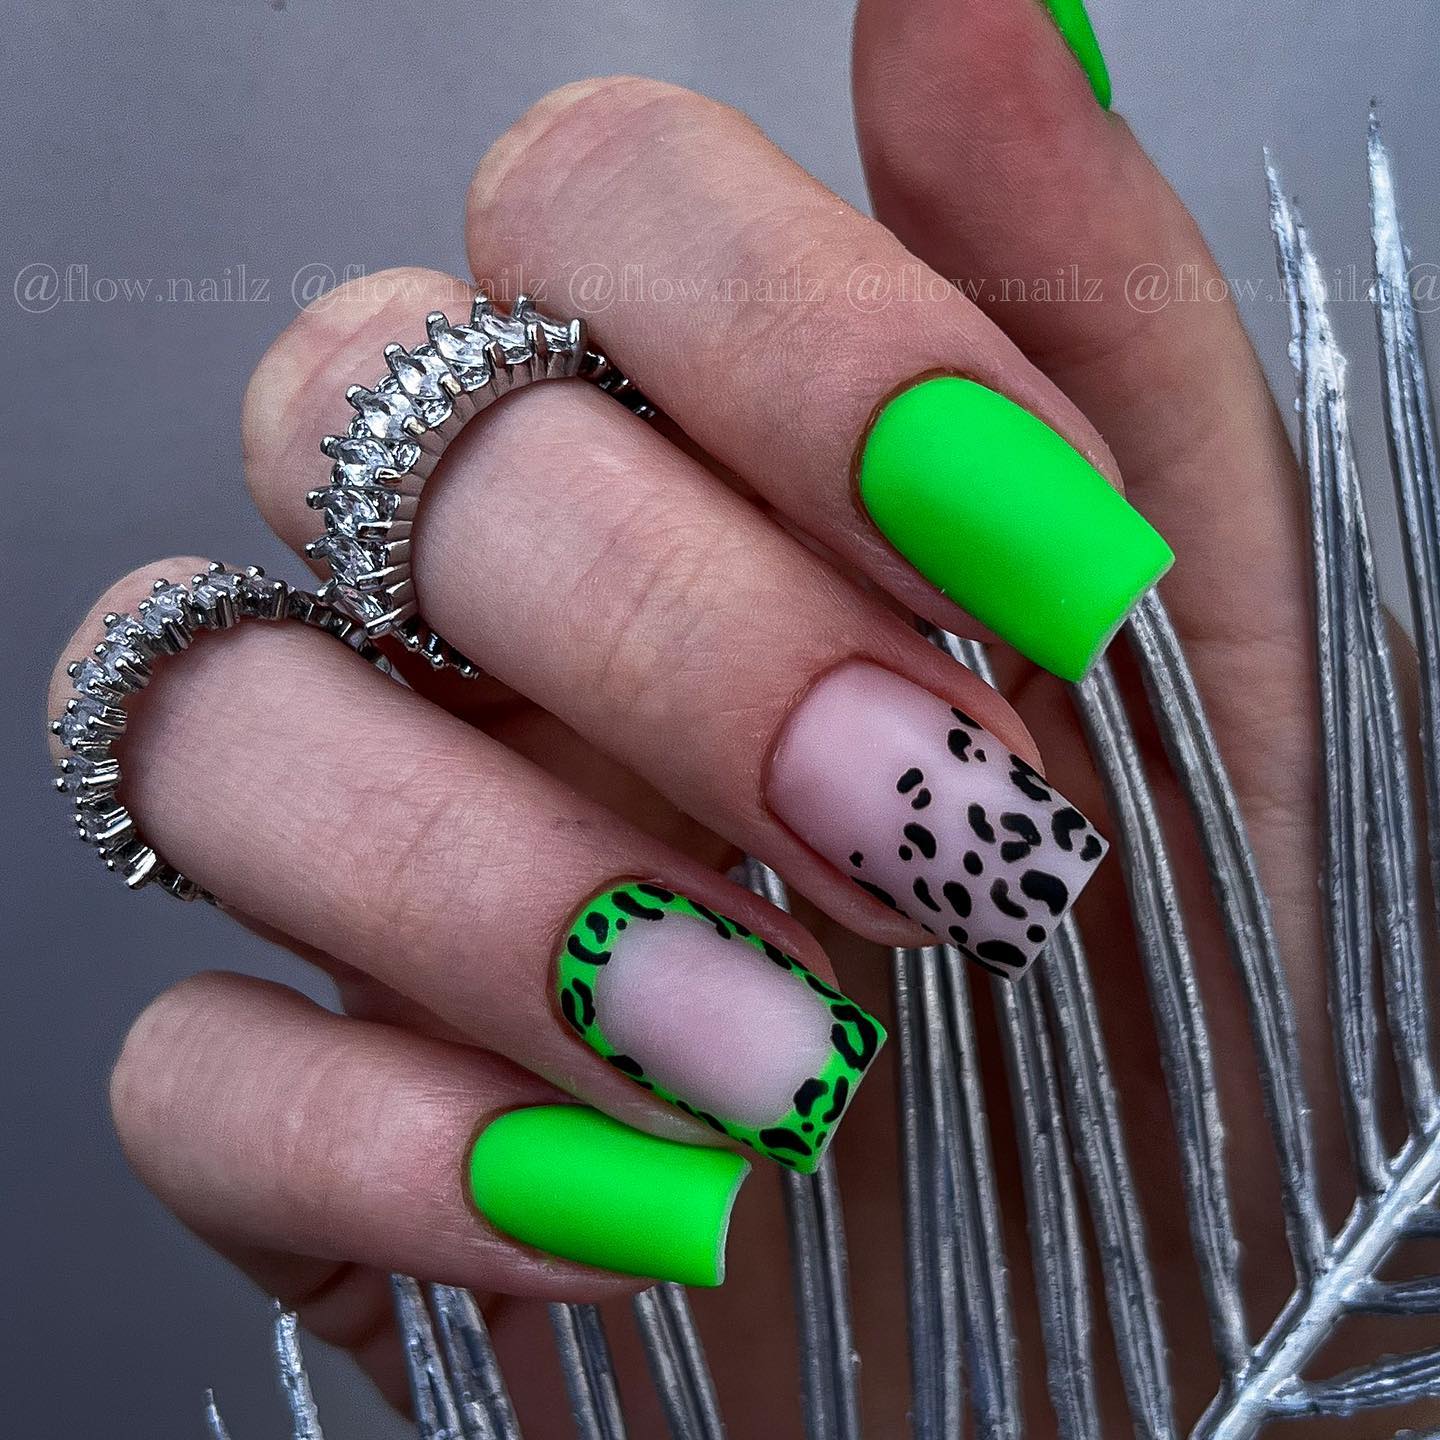 Matte green is ready to rock your nails with leopard prints on it. For your ring finger, you can use a distinct nail art: a green leopard print frame.